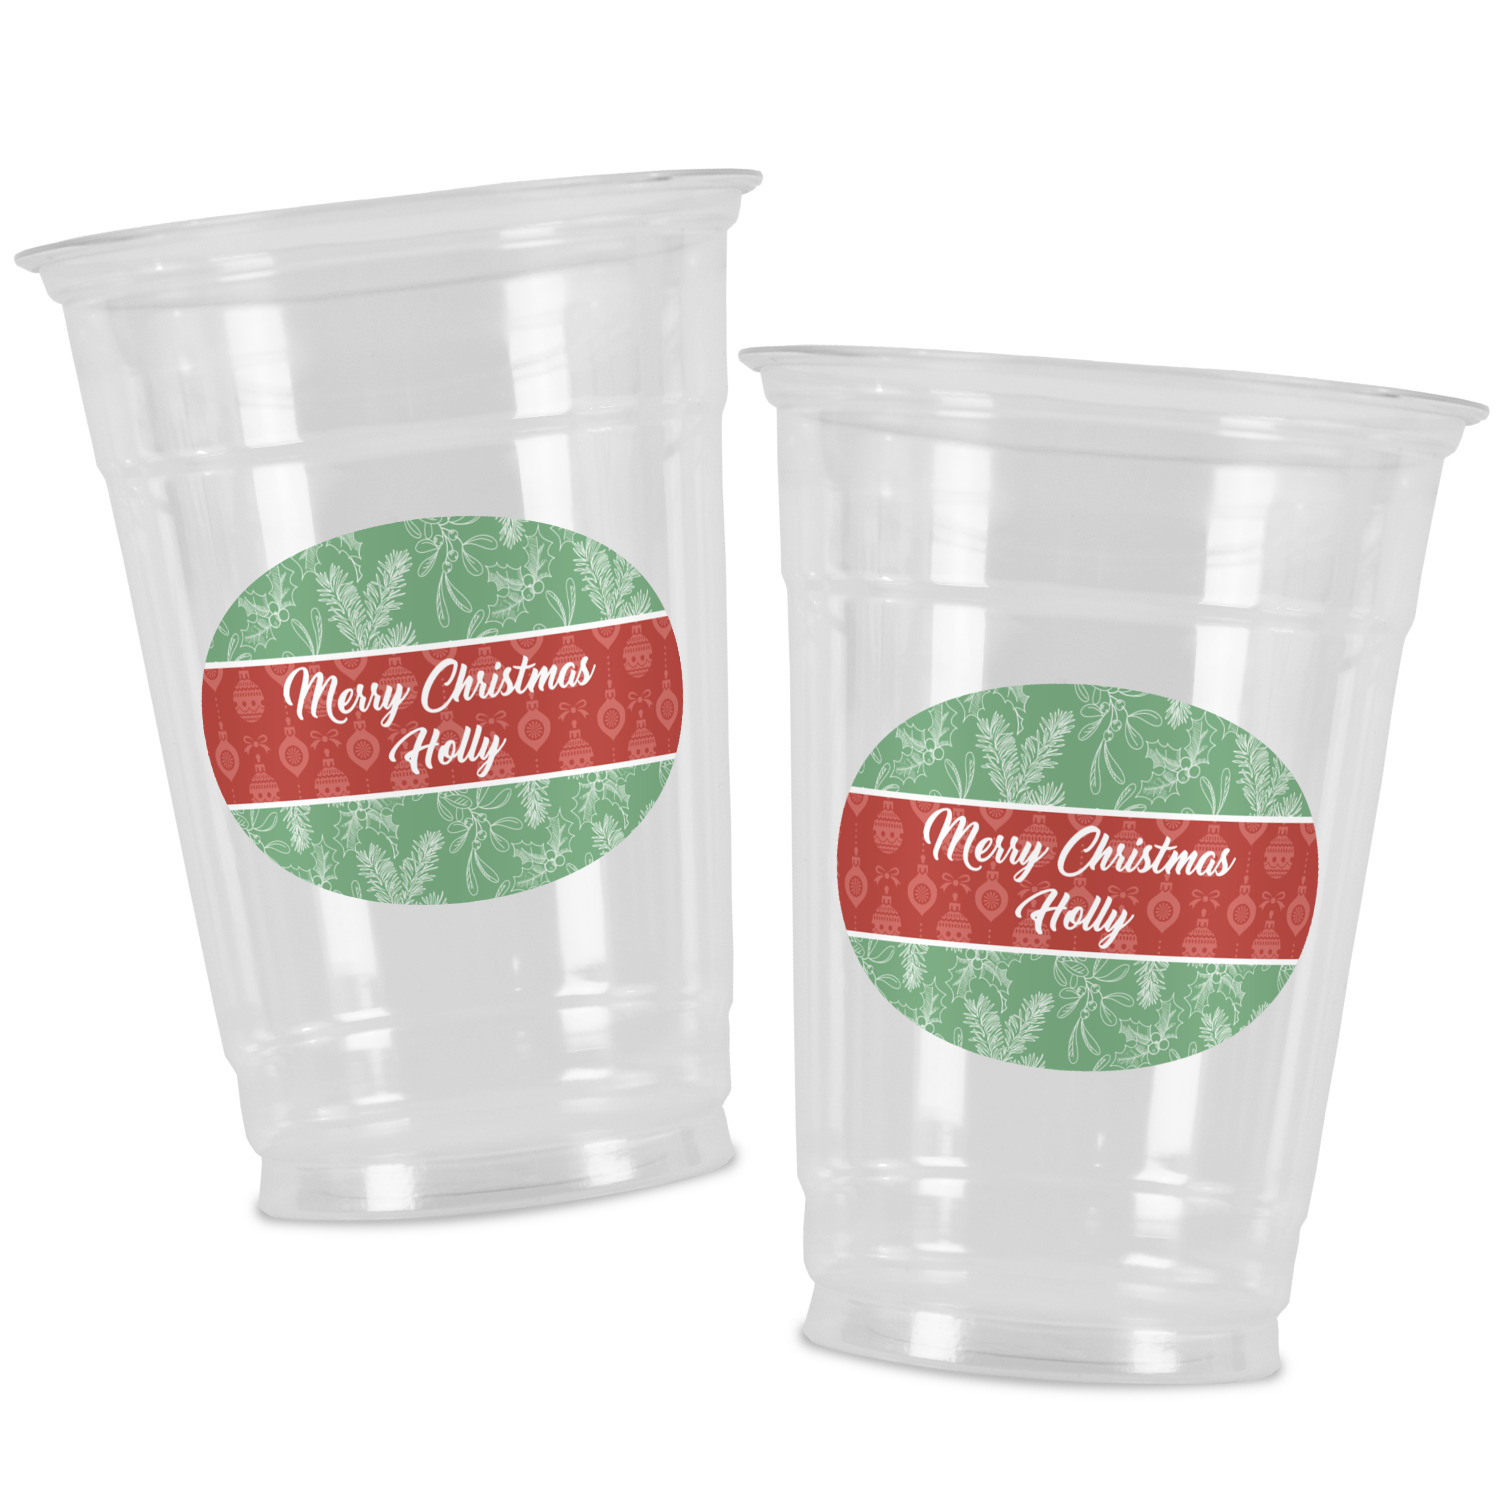 https://www.youcustomizeit.com/common/MAKE/204358/Christmas-Holly-Party-Cups-16oz-Alt-View.jpg?lm=1671139985